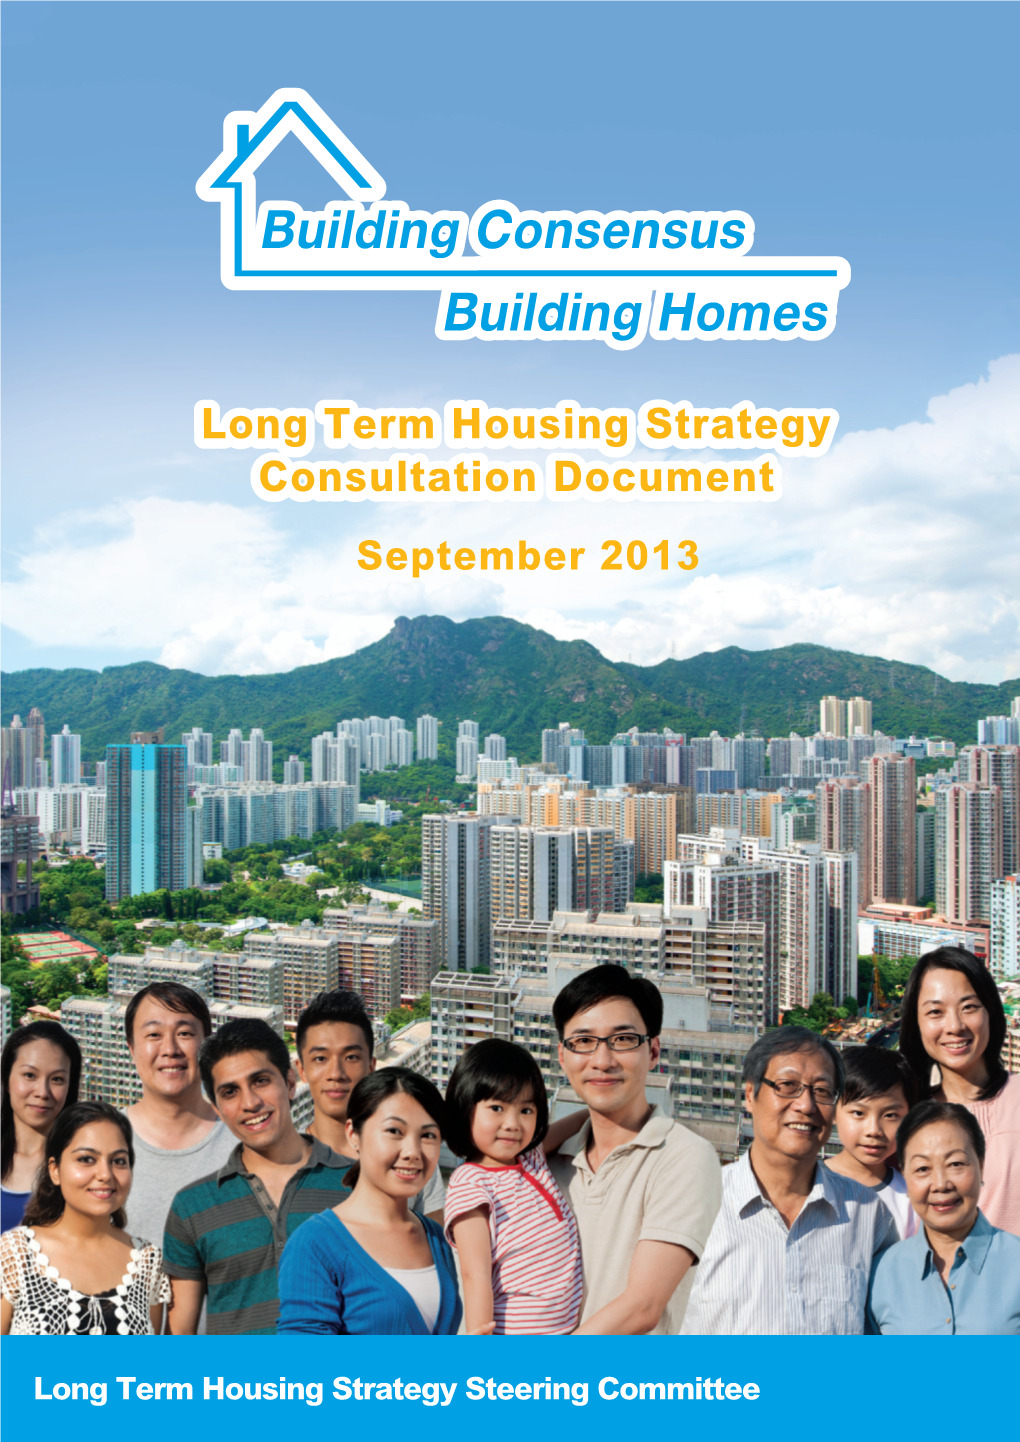 Long Term Housing Strategy Consultation Document